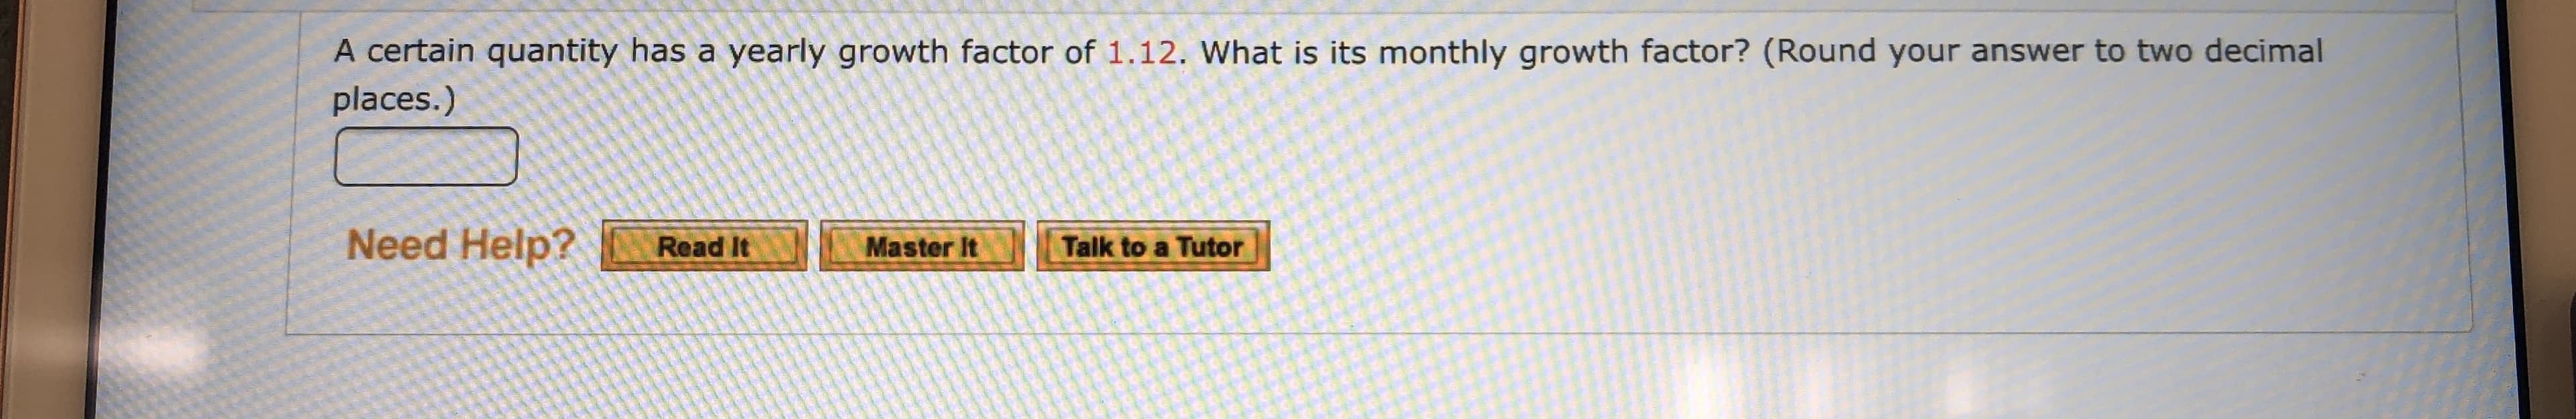 A certain quantity has a yearly growth factor of 1.12. What is its monthly growth factor? (Round your answer to two decimal
places.)
Need Help?
Read It
Master It
Talk to a Tutor
